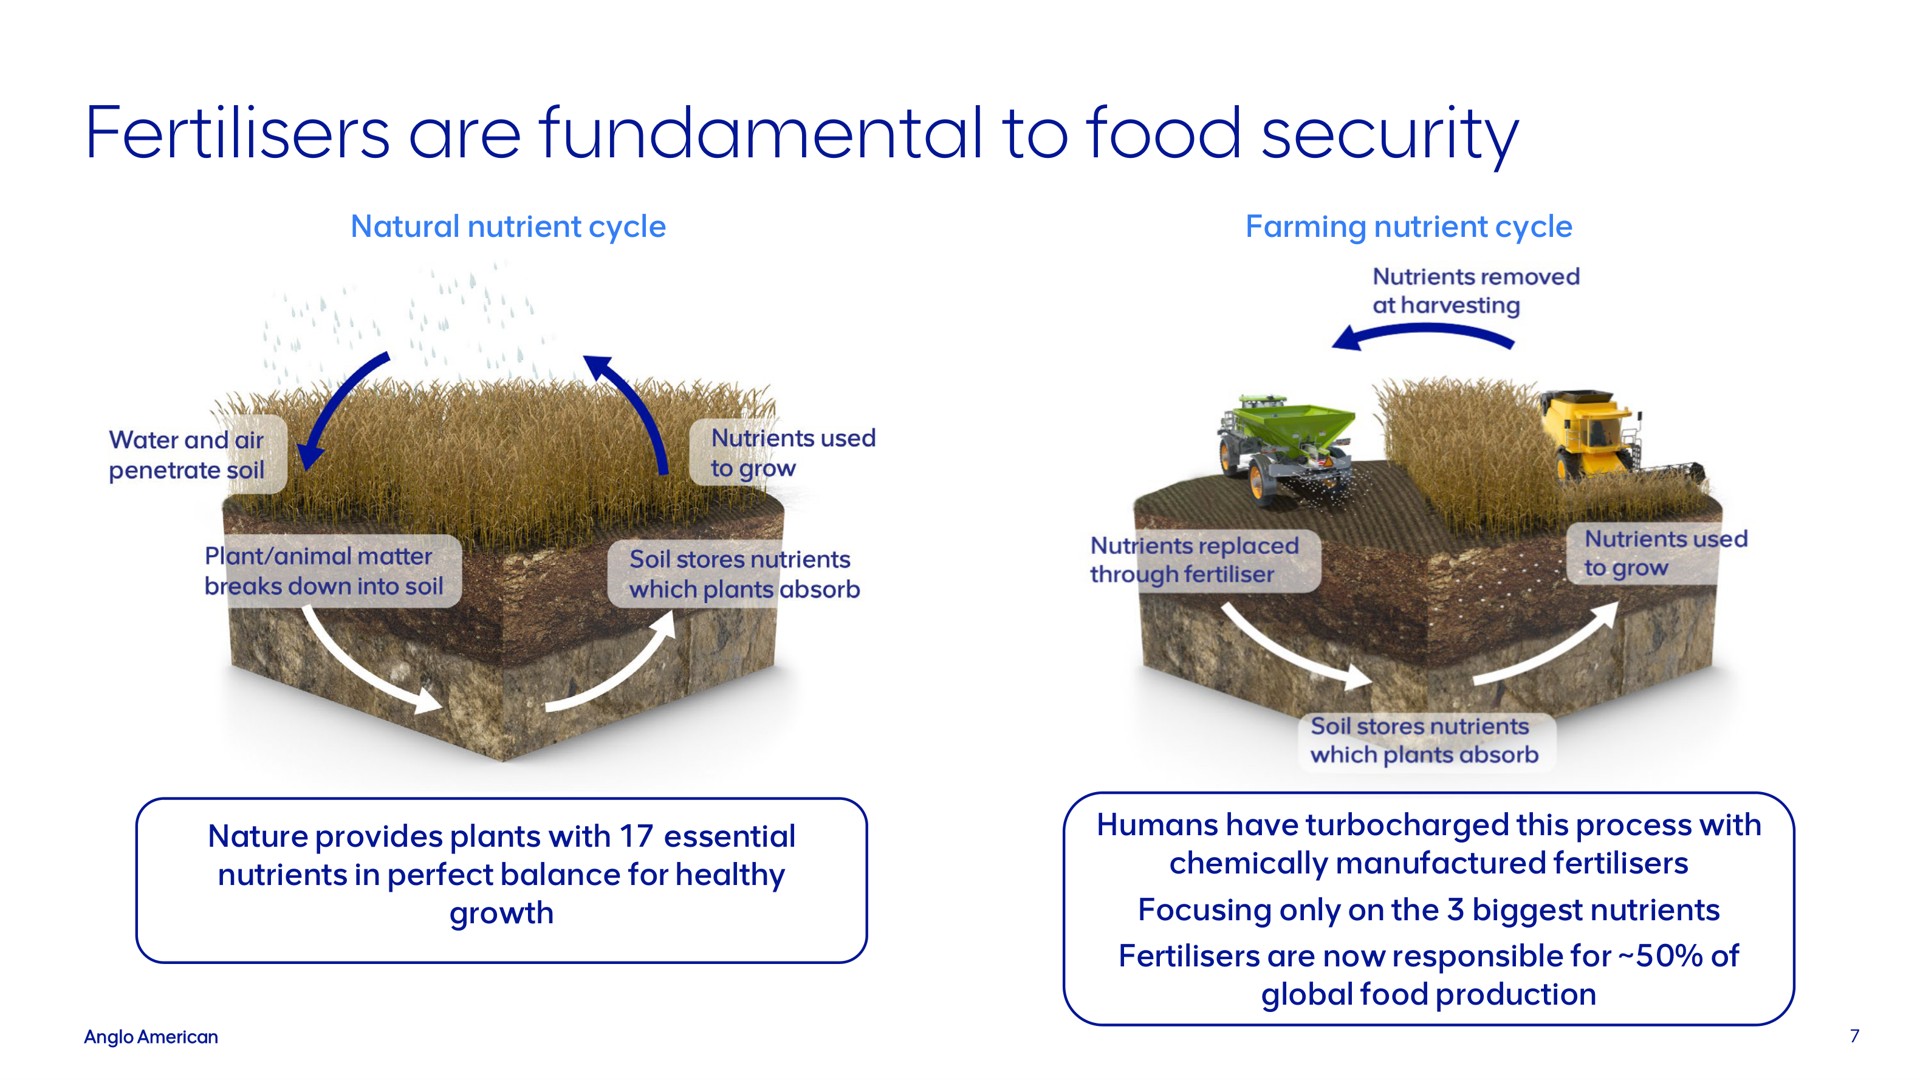 are fundamental to food security | AngloAmerican